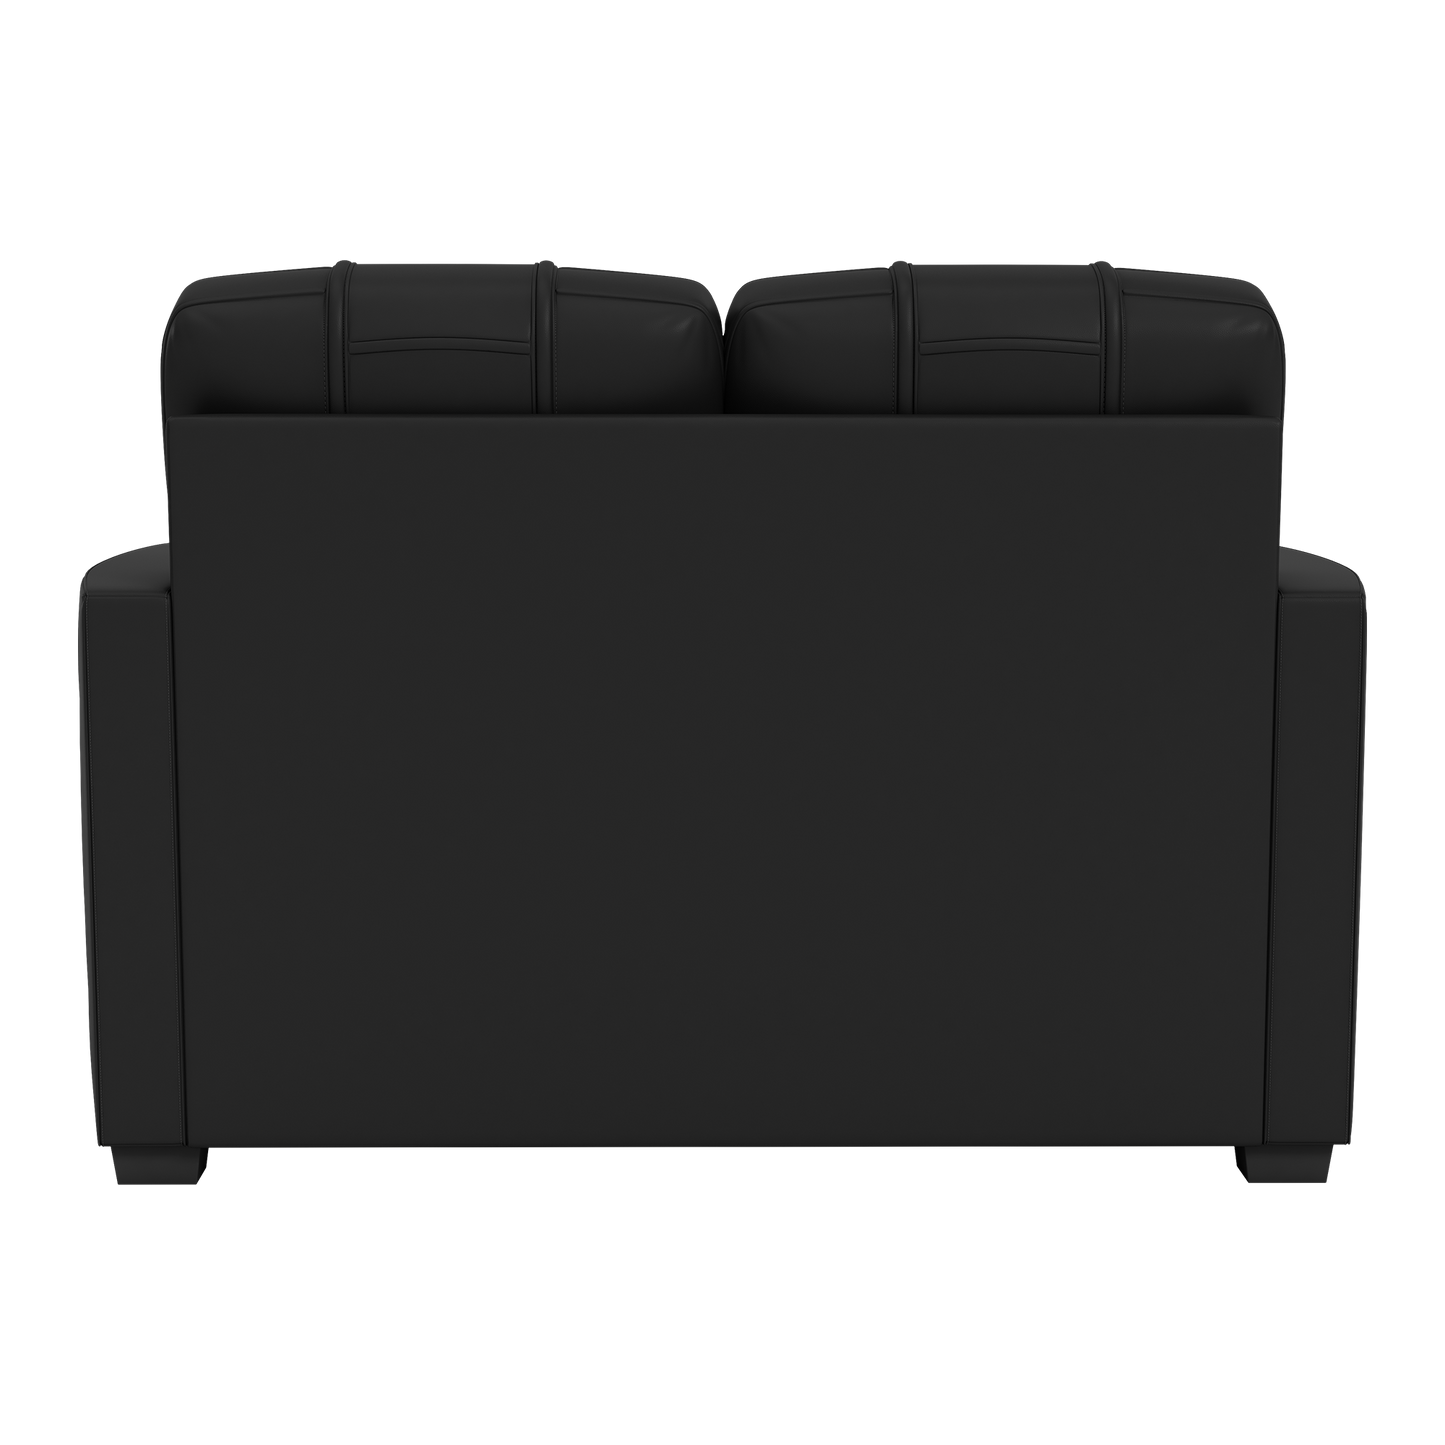 Silver Loveseat with California Golden Bears Secondary Logo